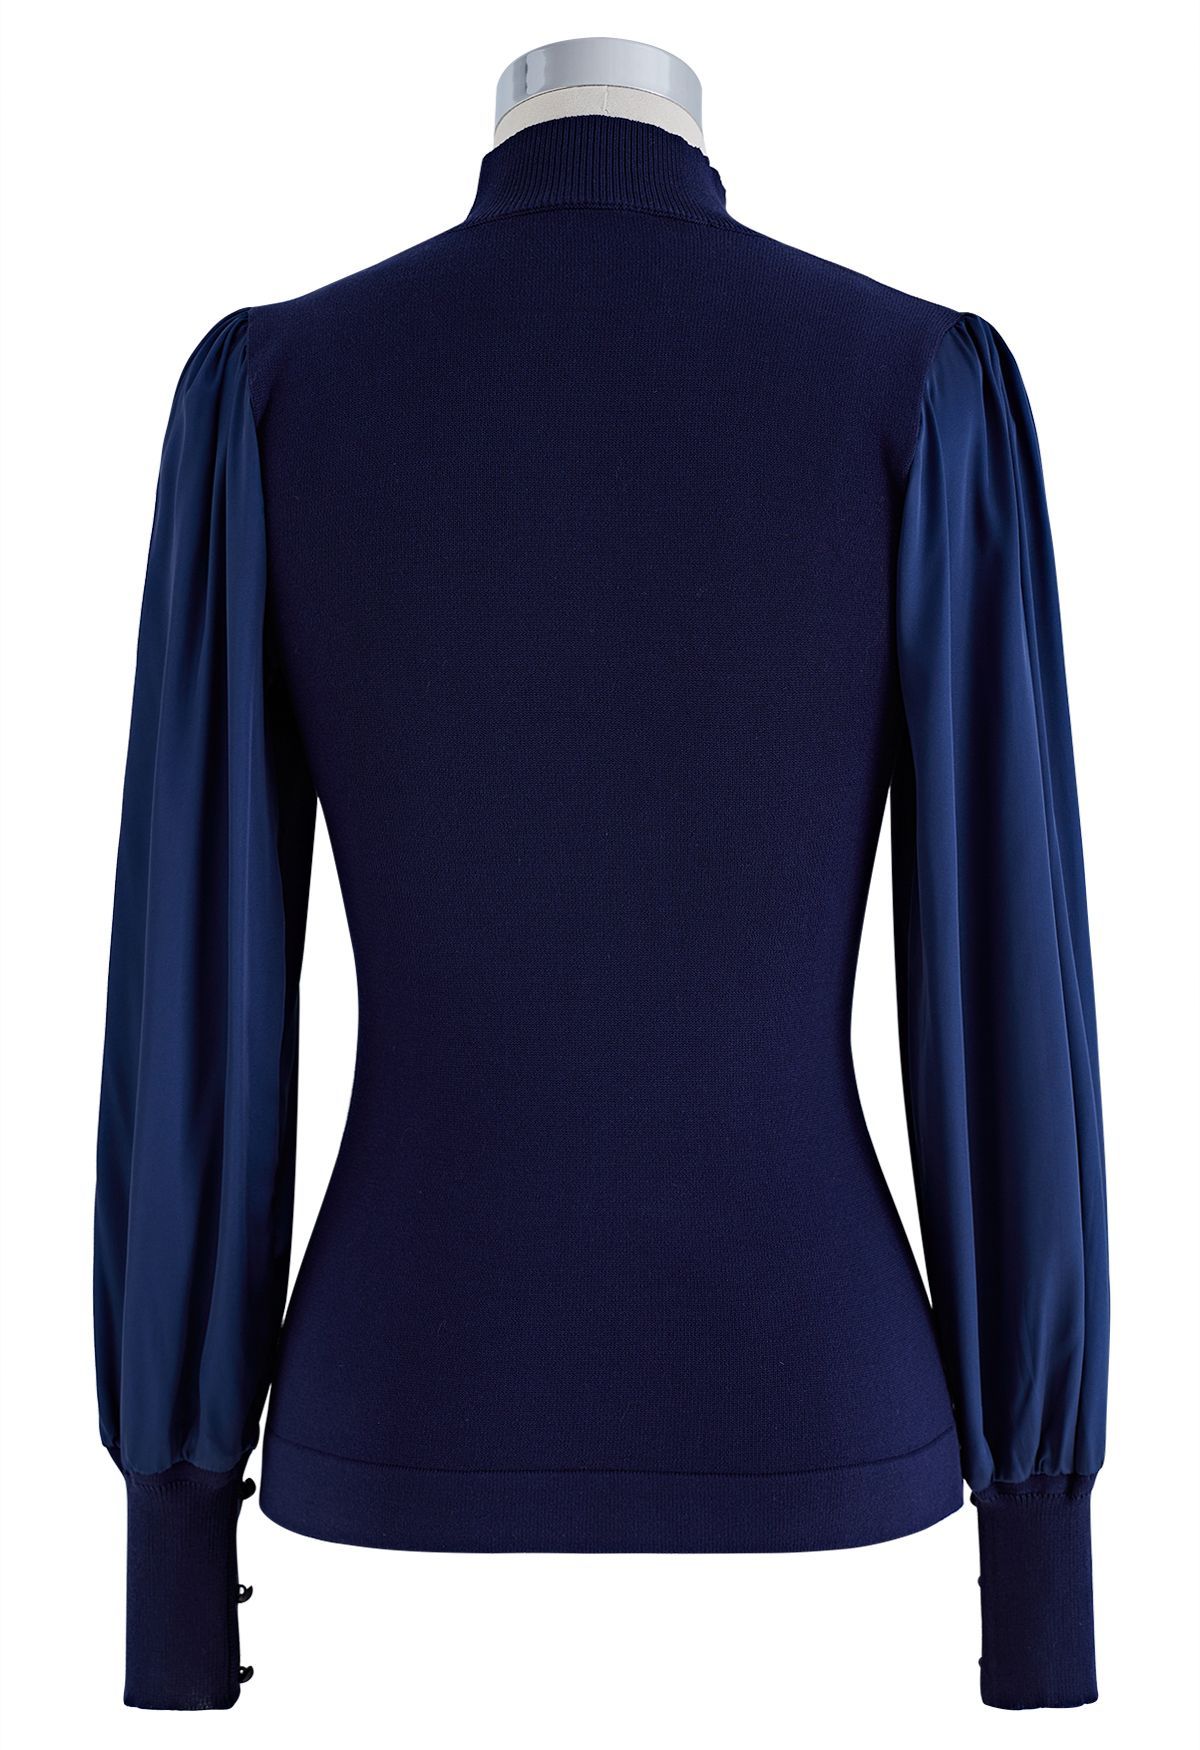 Mock Neck Satin Spliced Knit Top in Navy | Chicwish